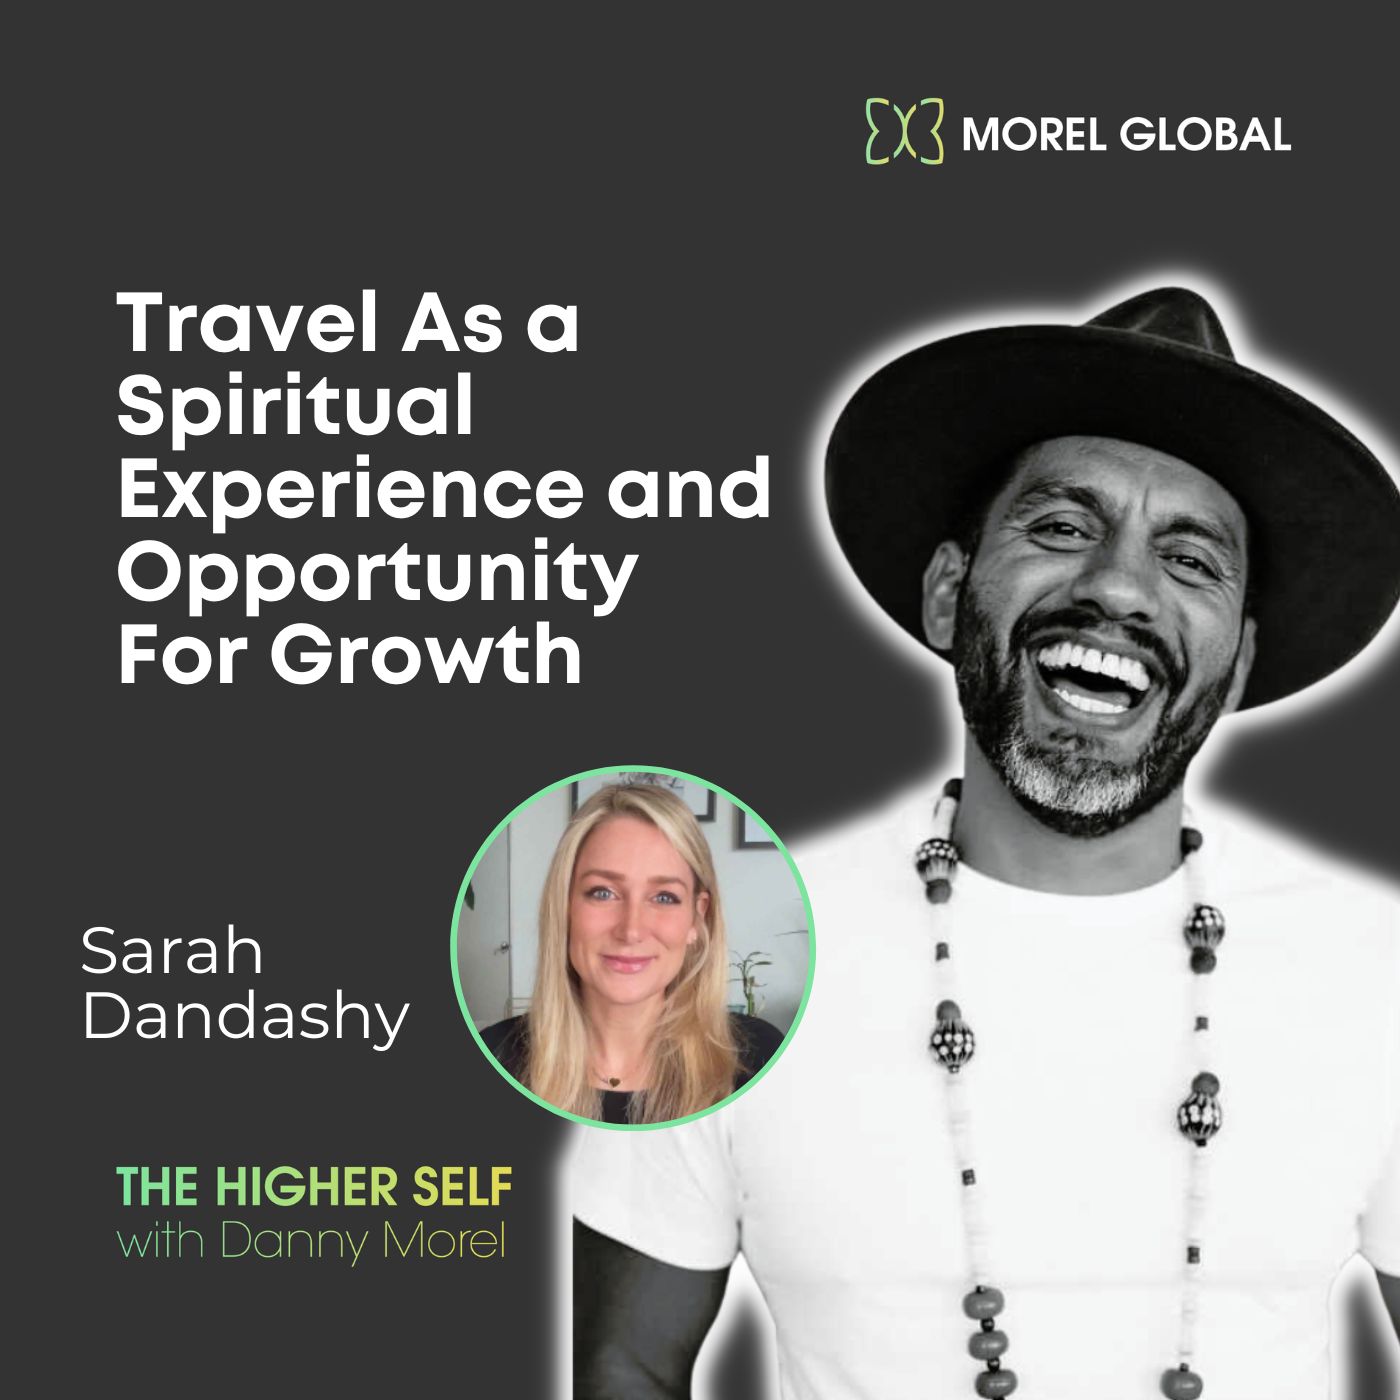 044 Sarah Dandashy - Travel As a Spiritual Experience and Opportunity For Growth Image